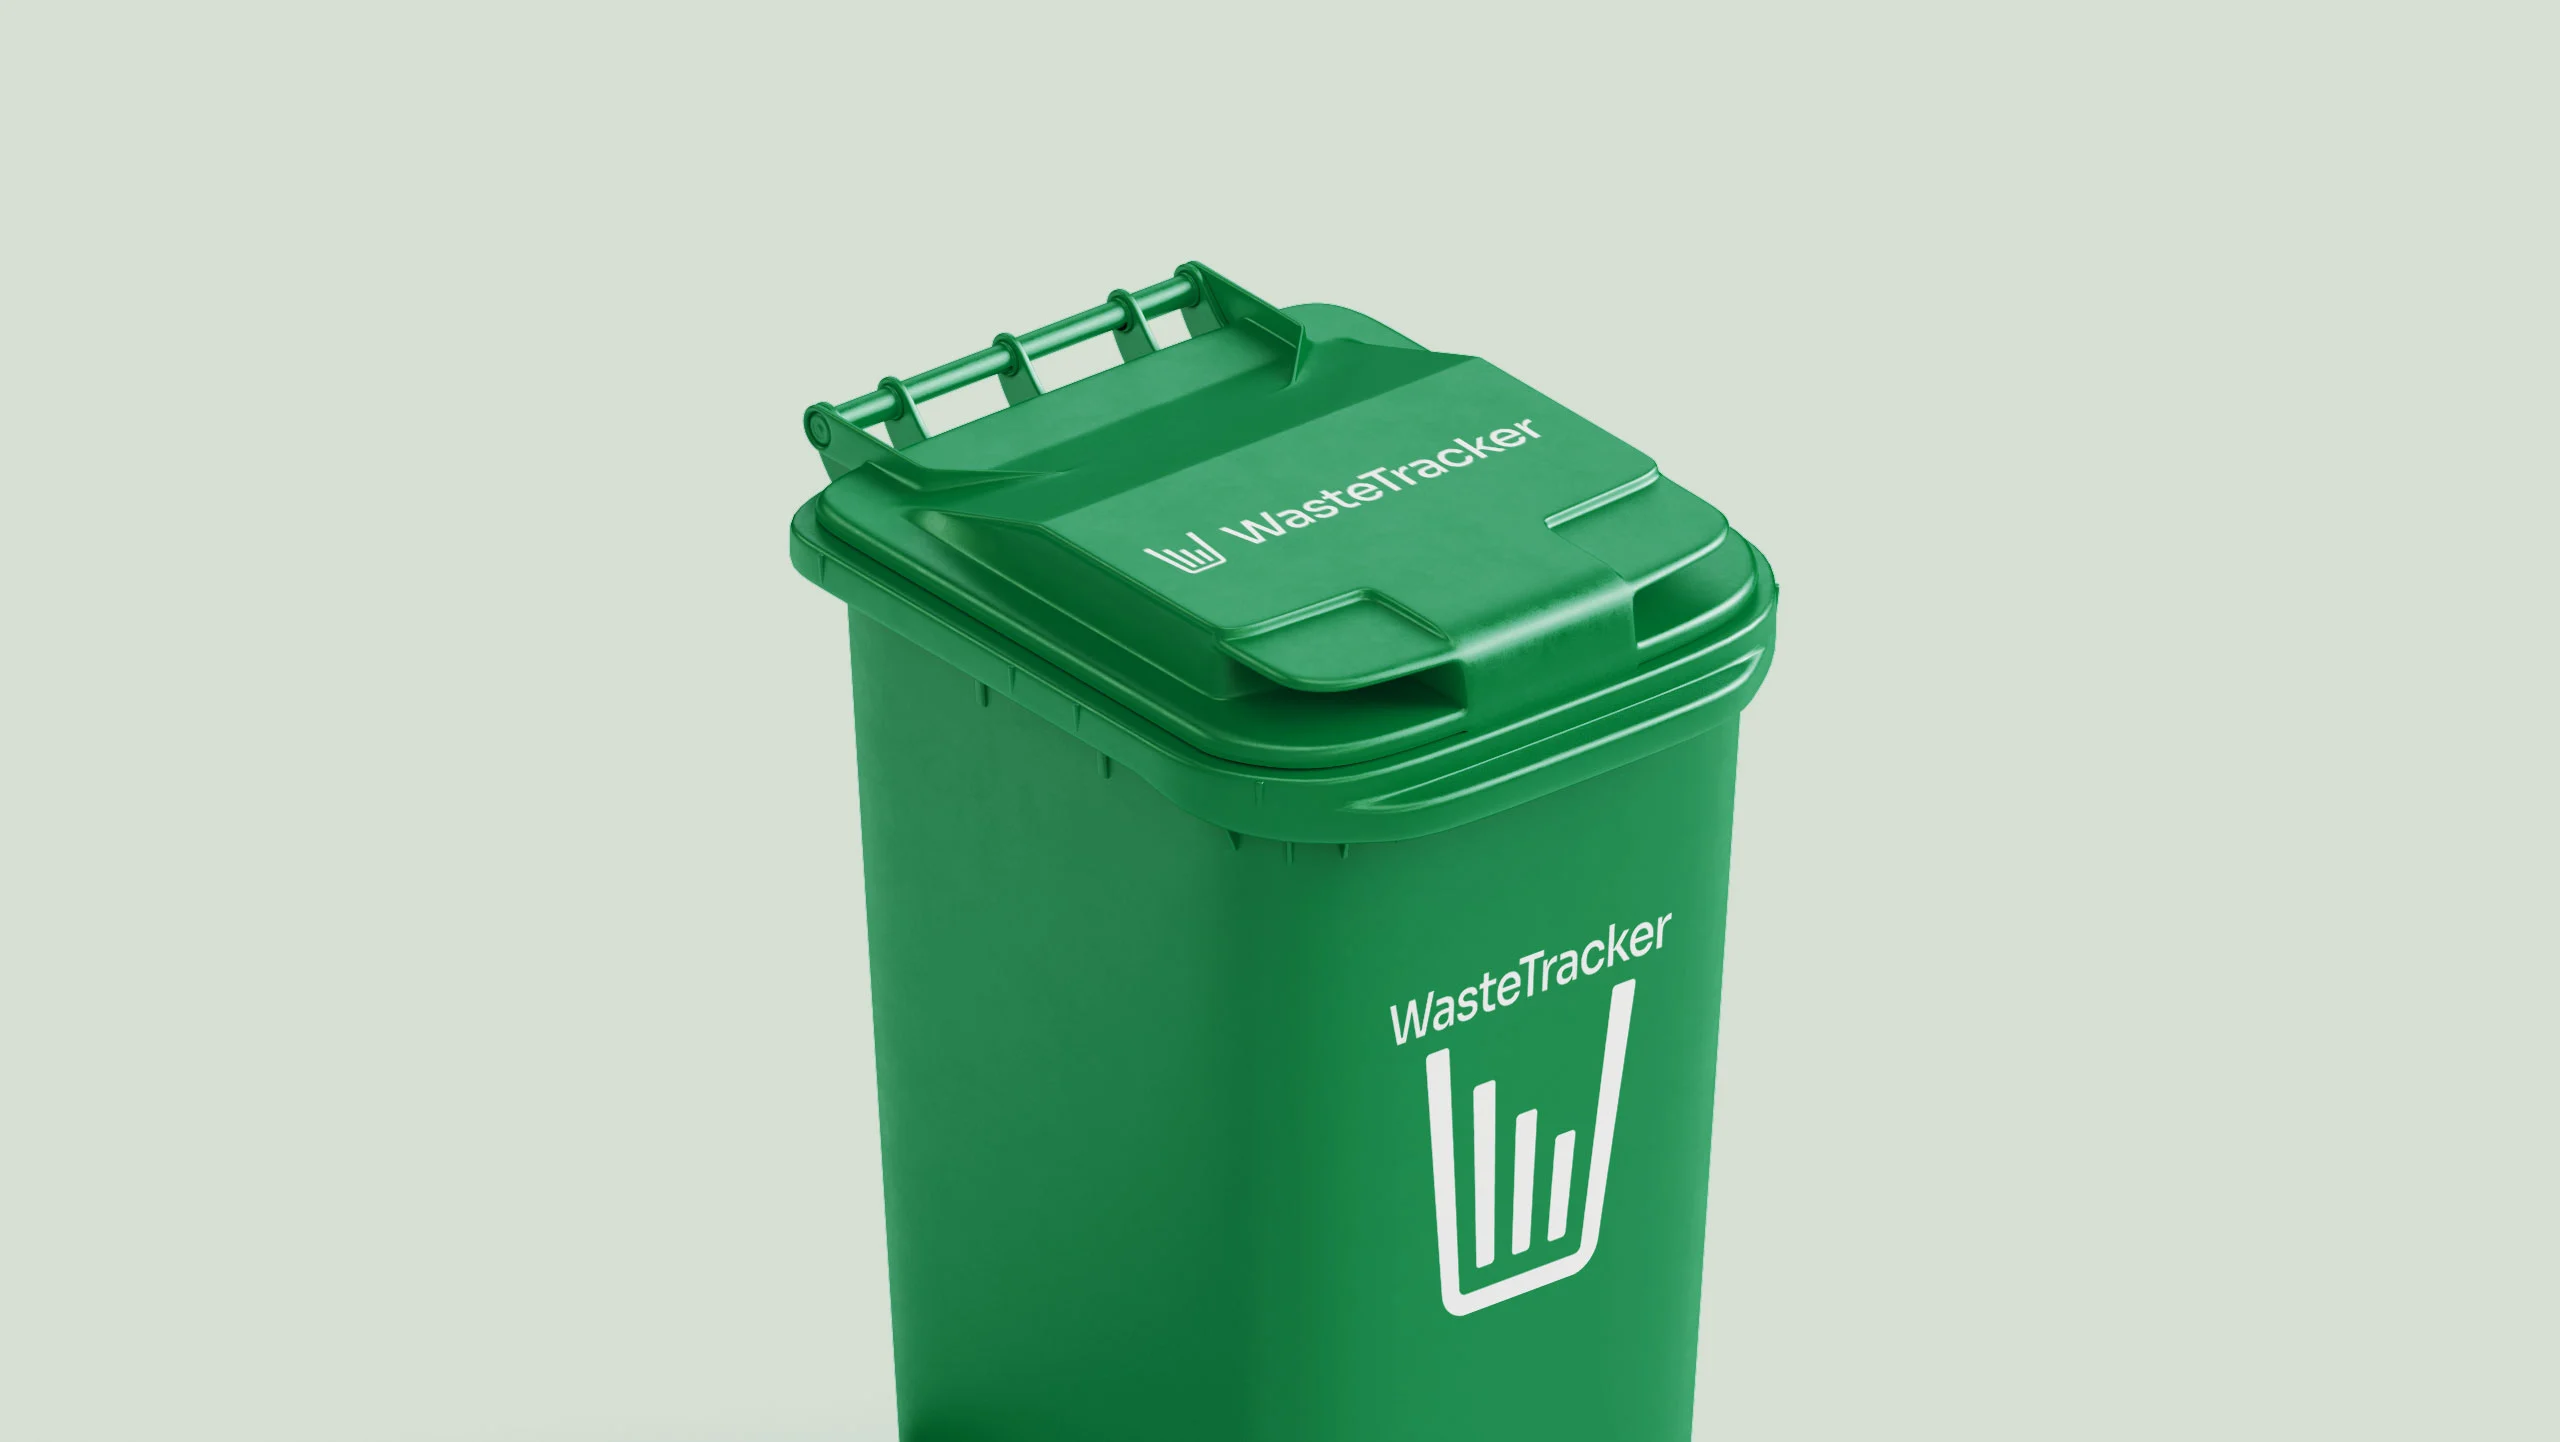 Trash can featuring the WasteTracker logo, illustrating practical branding in waste management.